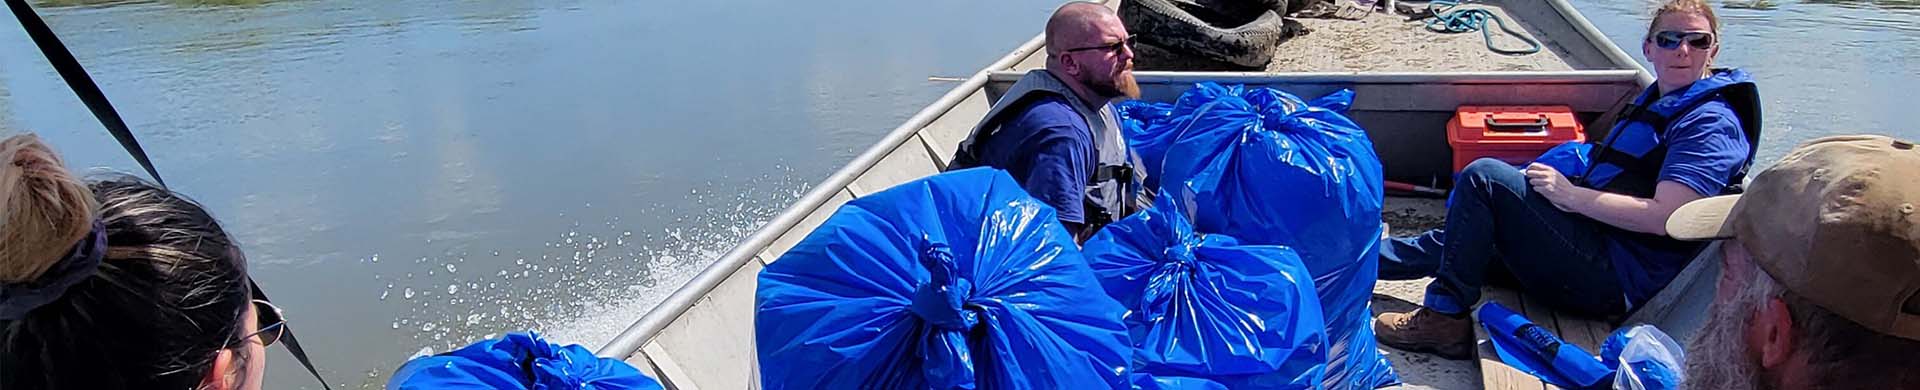 Volunteers Hauling Trash Out of River